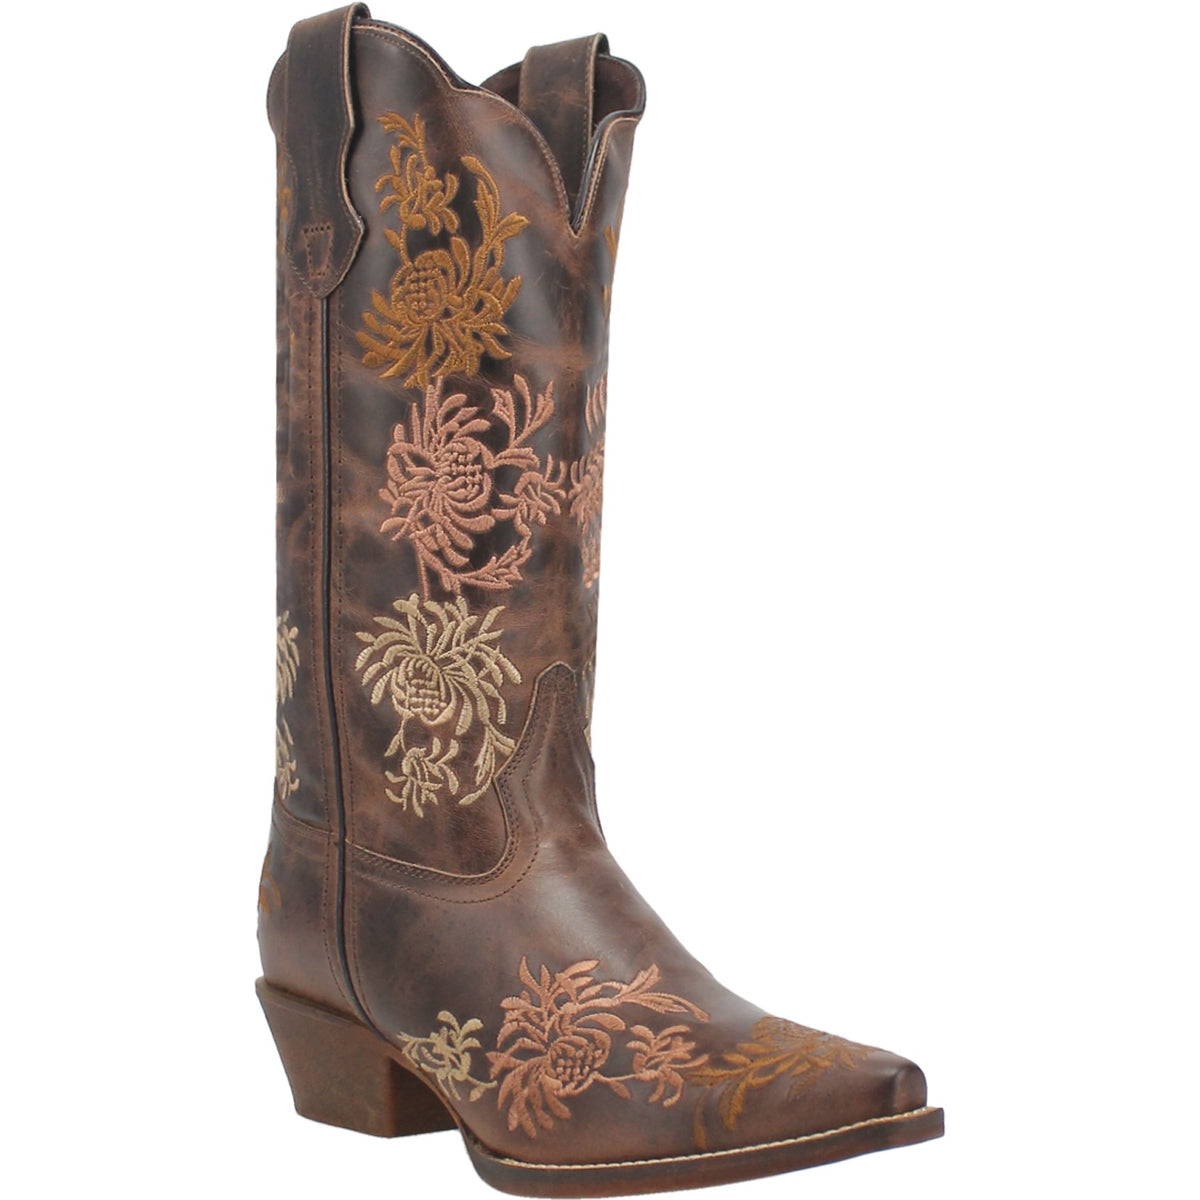 SYLVAN LEATHER BOOT Cover